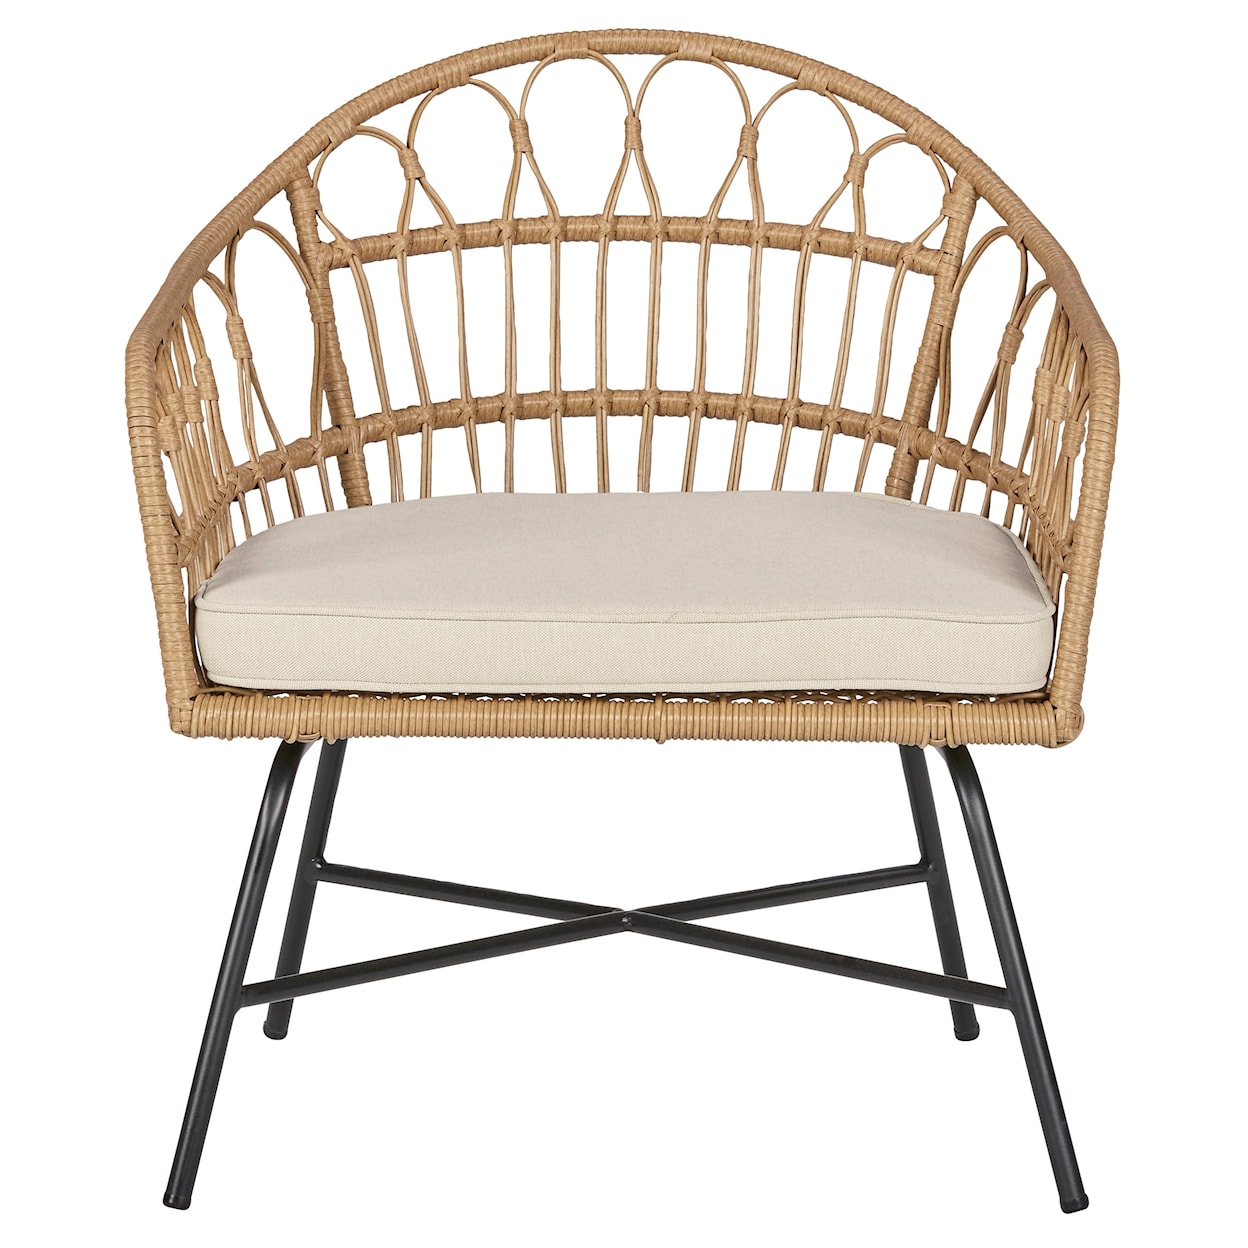 Signature Design by Ashley Hoonah Indoor/Outdoor Accent Chair